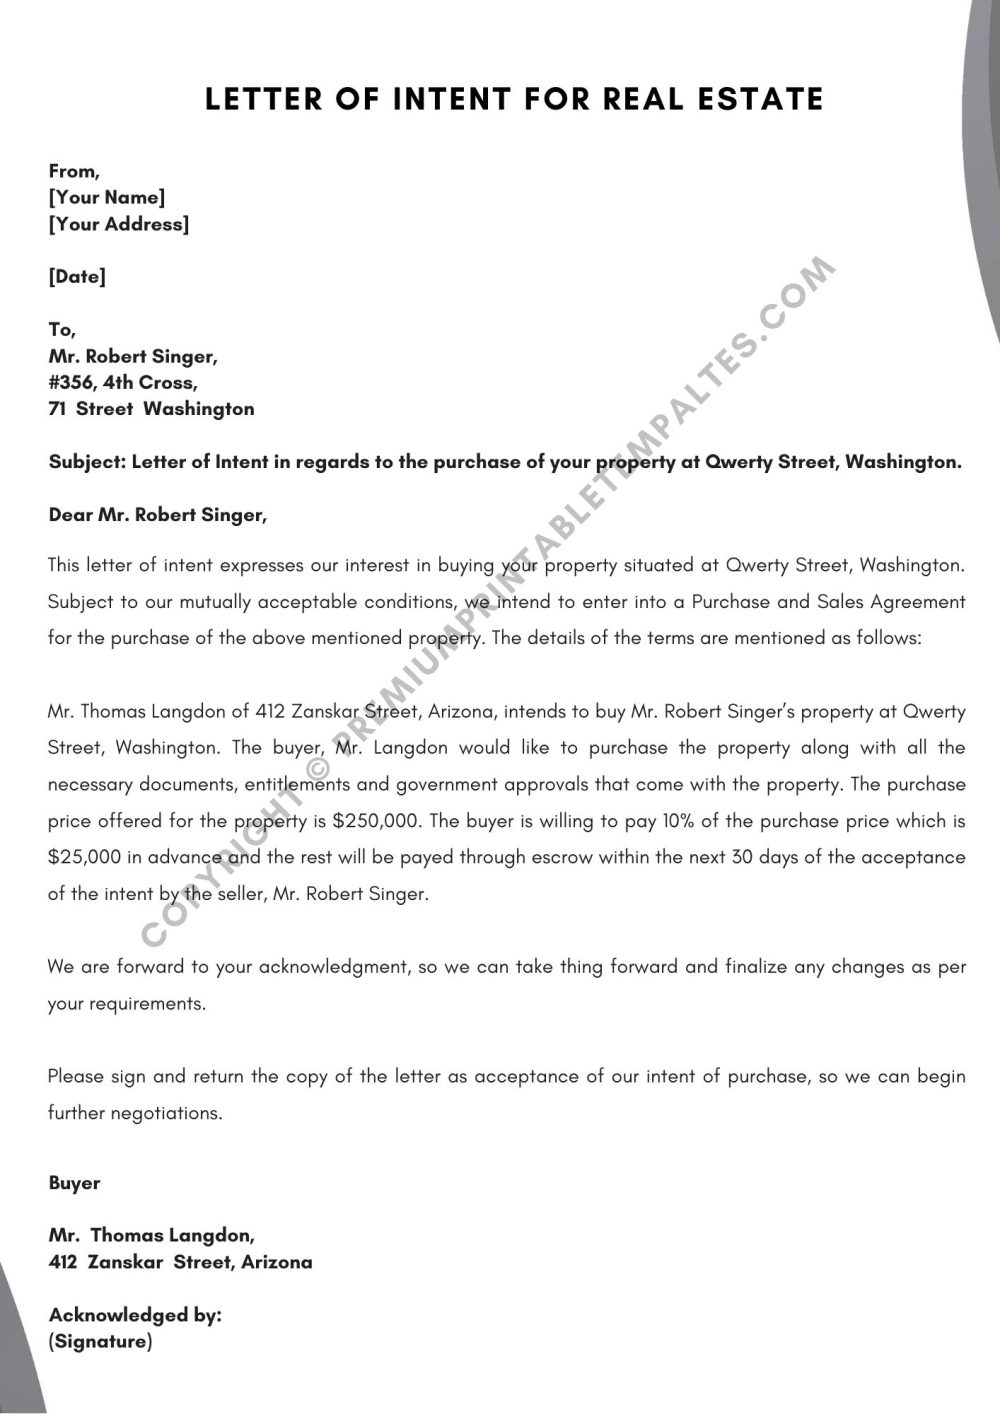 Letter of Intent for Real Estate PDF